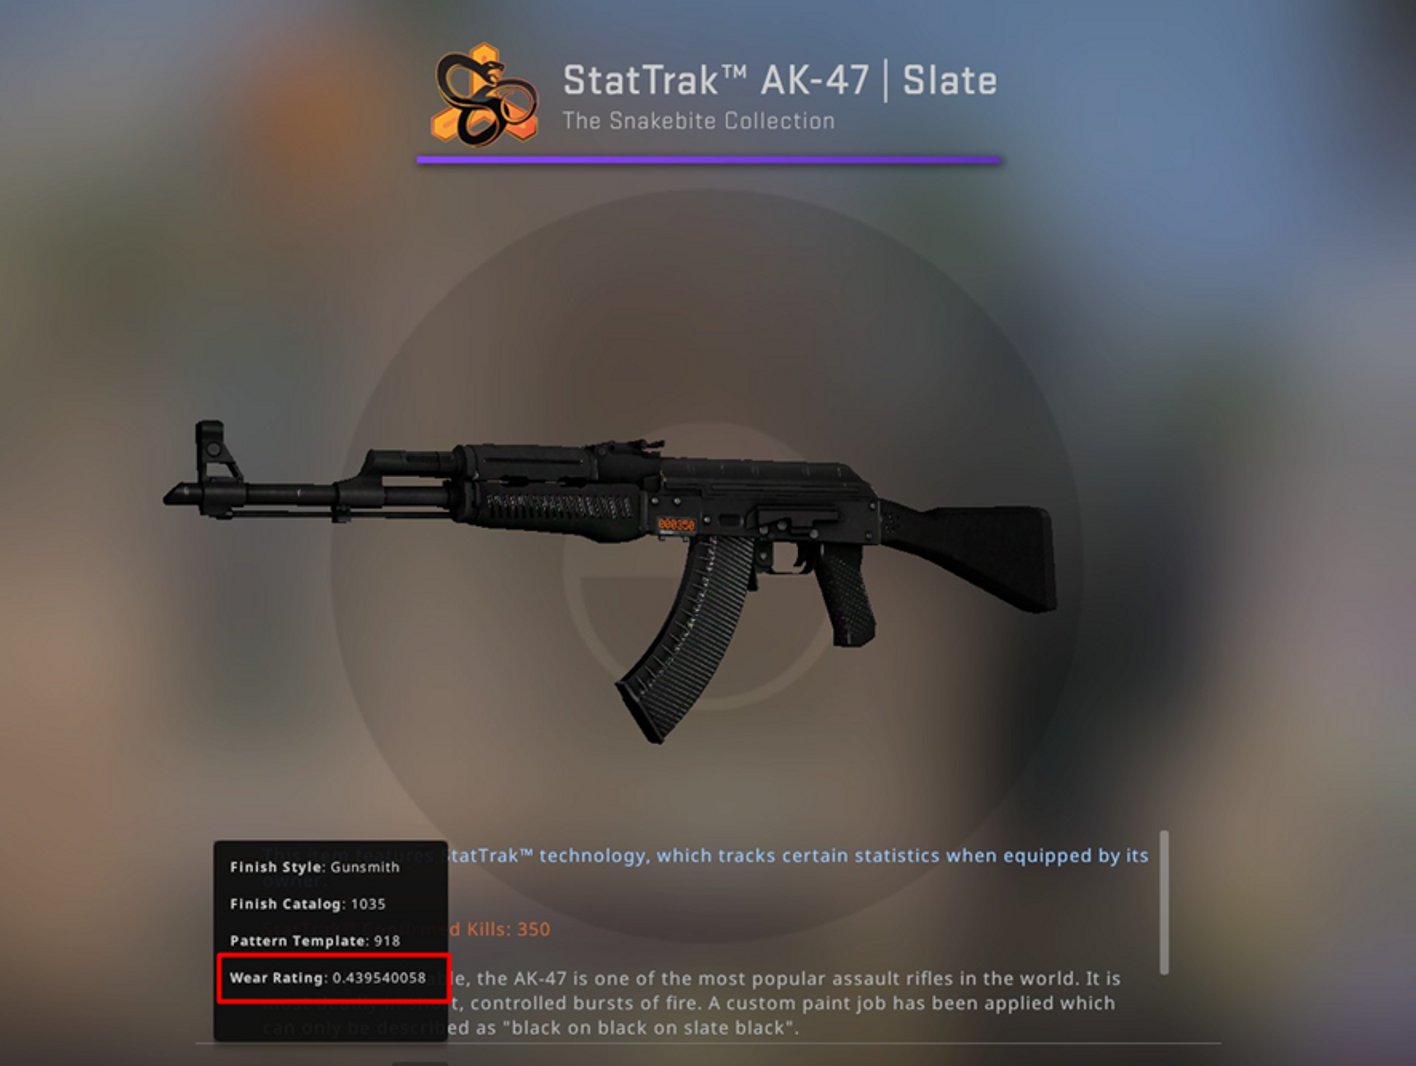 Am I the only one that thinks that AK47 looked like a black